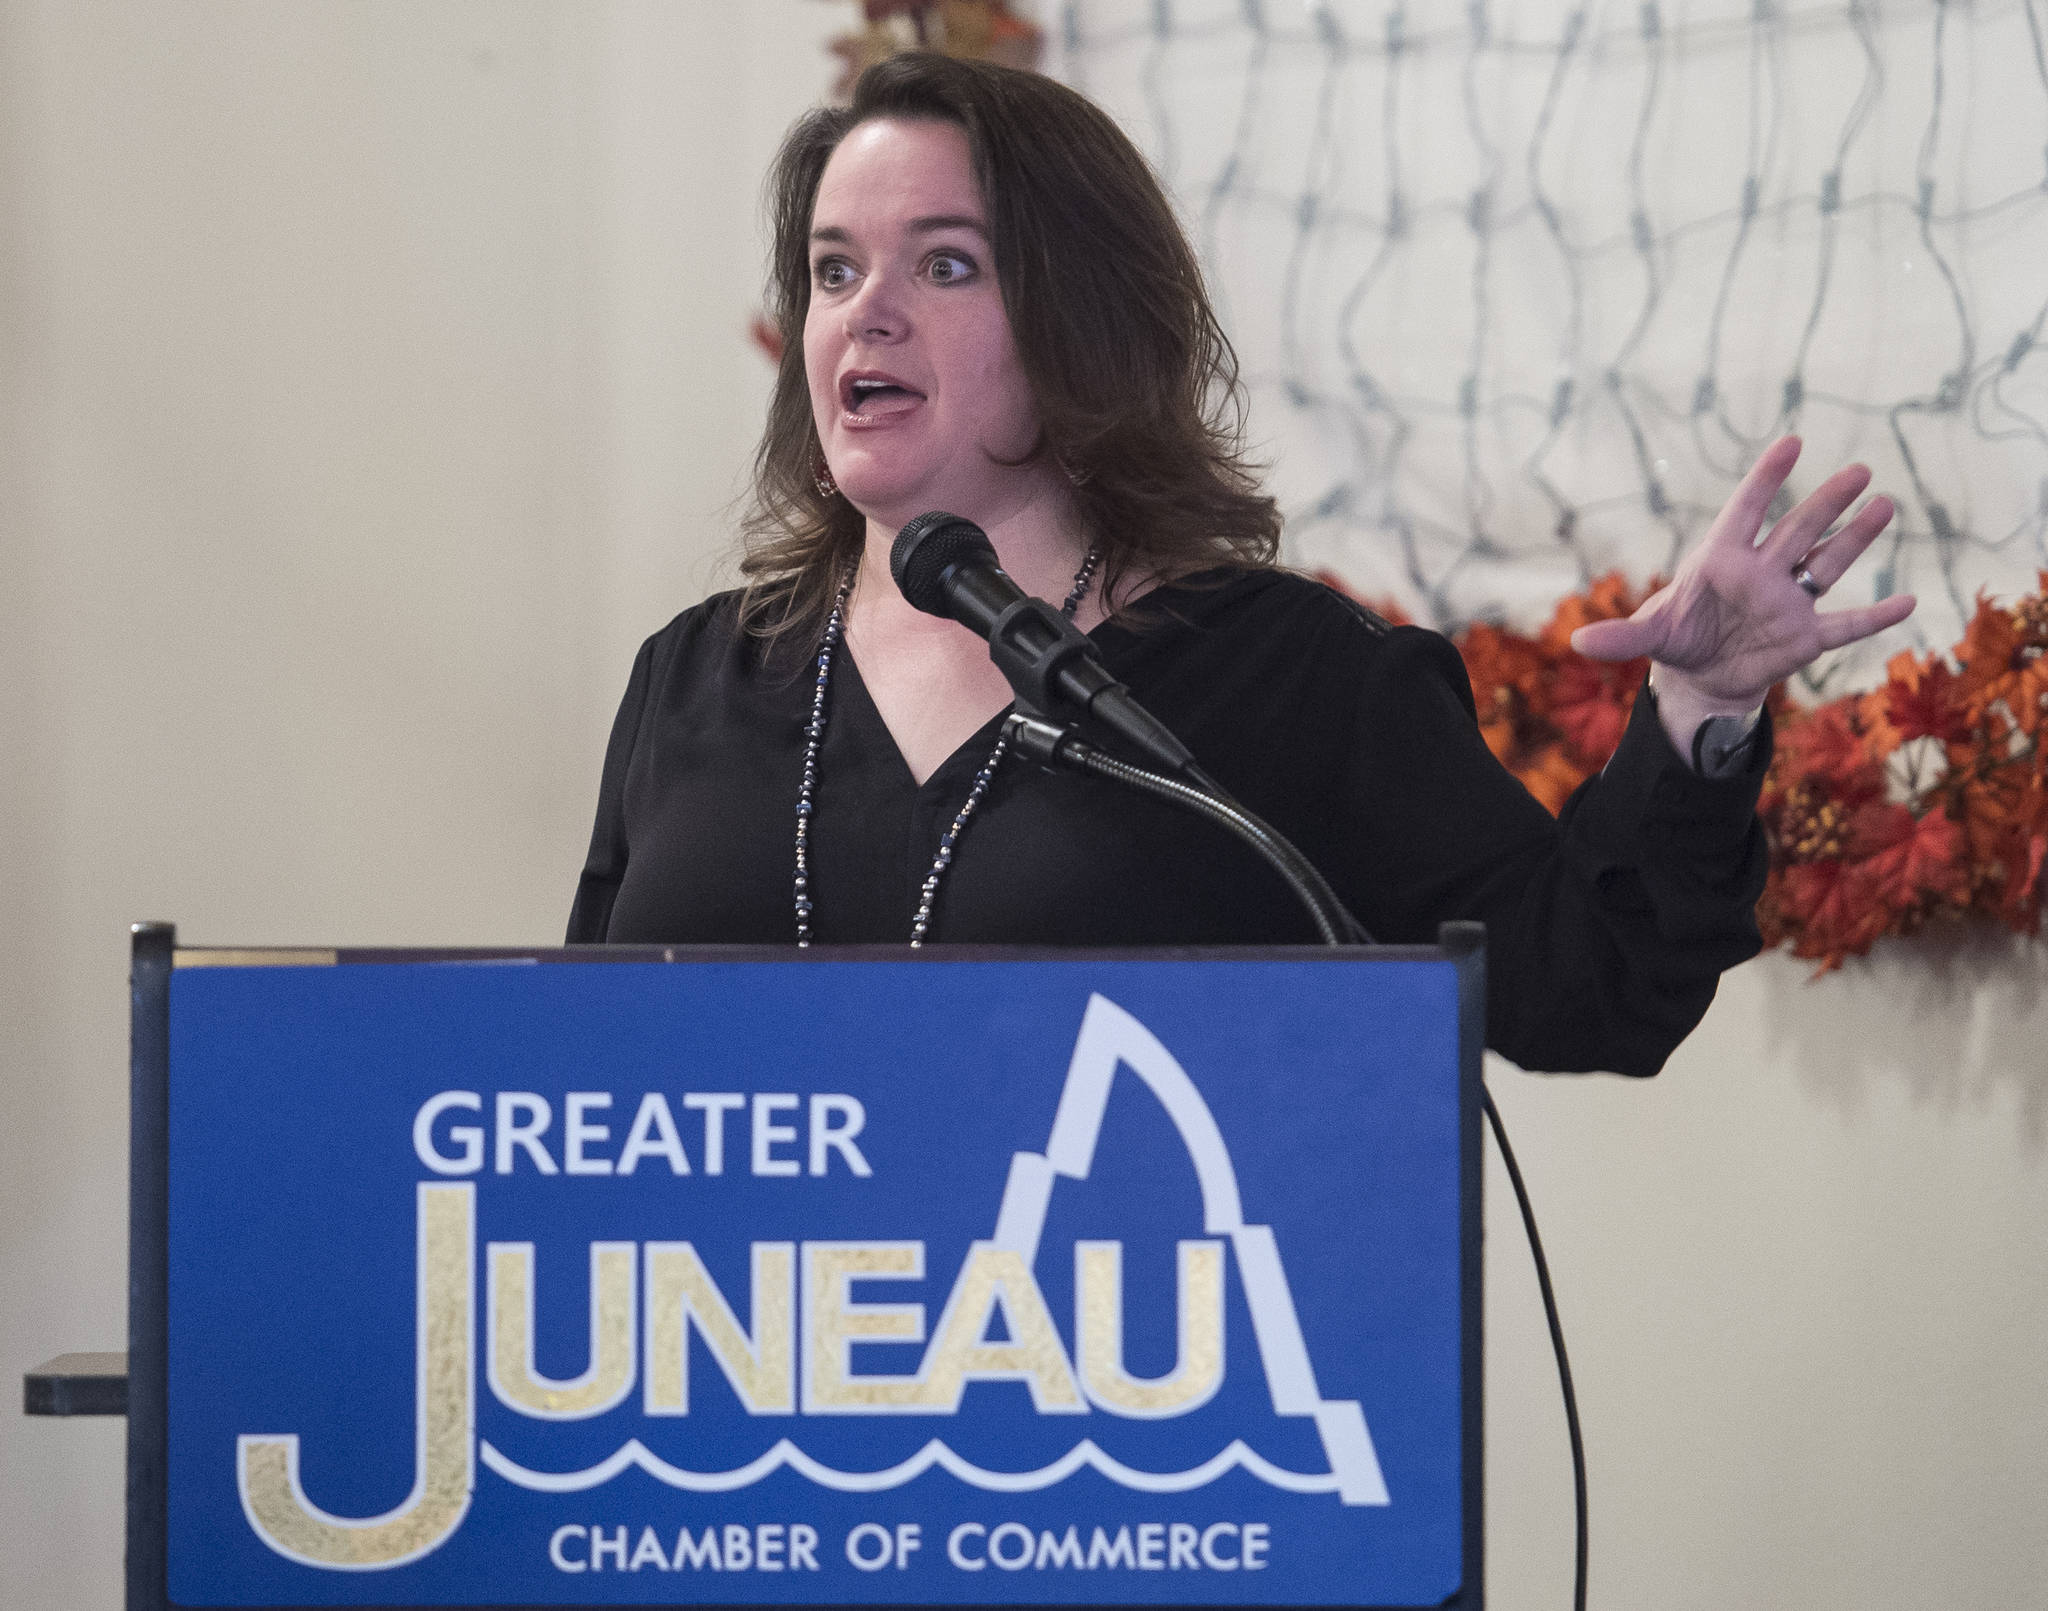 Meilani Schijvens gives her “Southeast by the Numbers” presentation at the Juneau Chamber of Commerce weekly luncheon at the Moose Lodge on Thursday, Nov. 16, 2017. (Michael Penn | Juneau Empire)